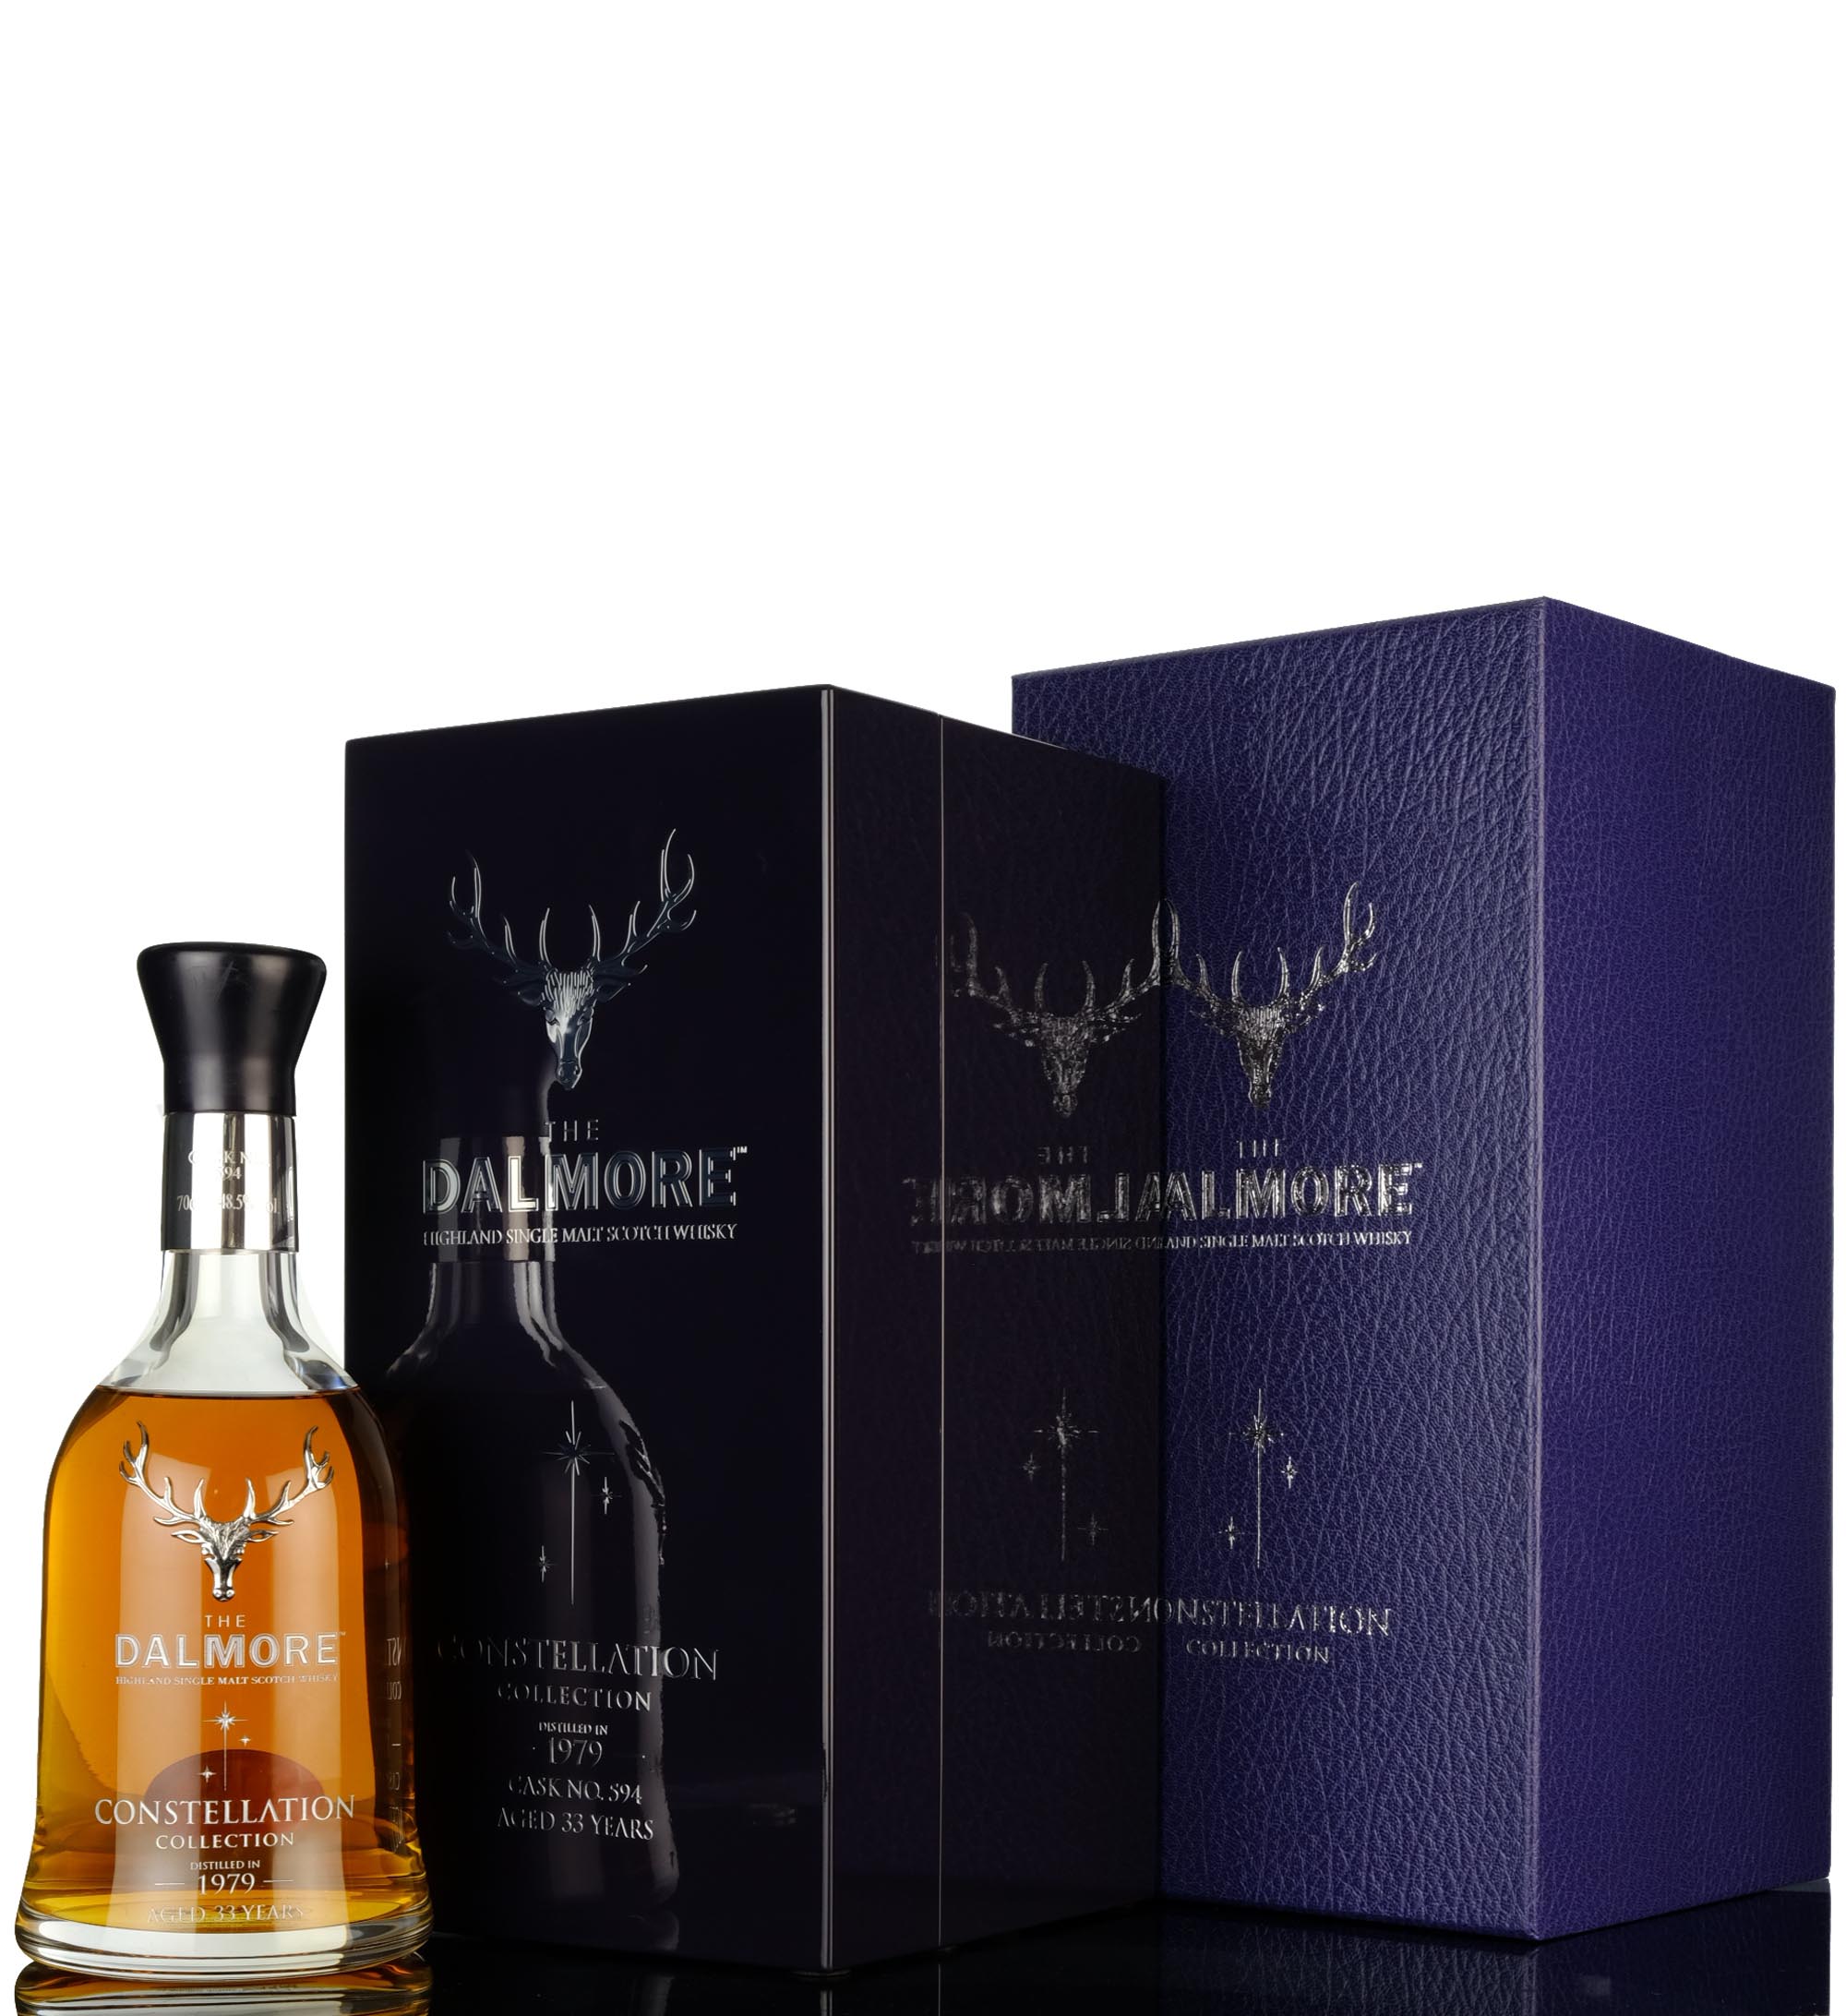 Dalmore 1979-2012 - 33 Year Old - Single Cask 594 - Constellation Collection